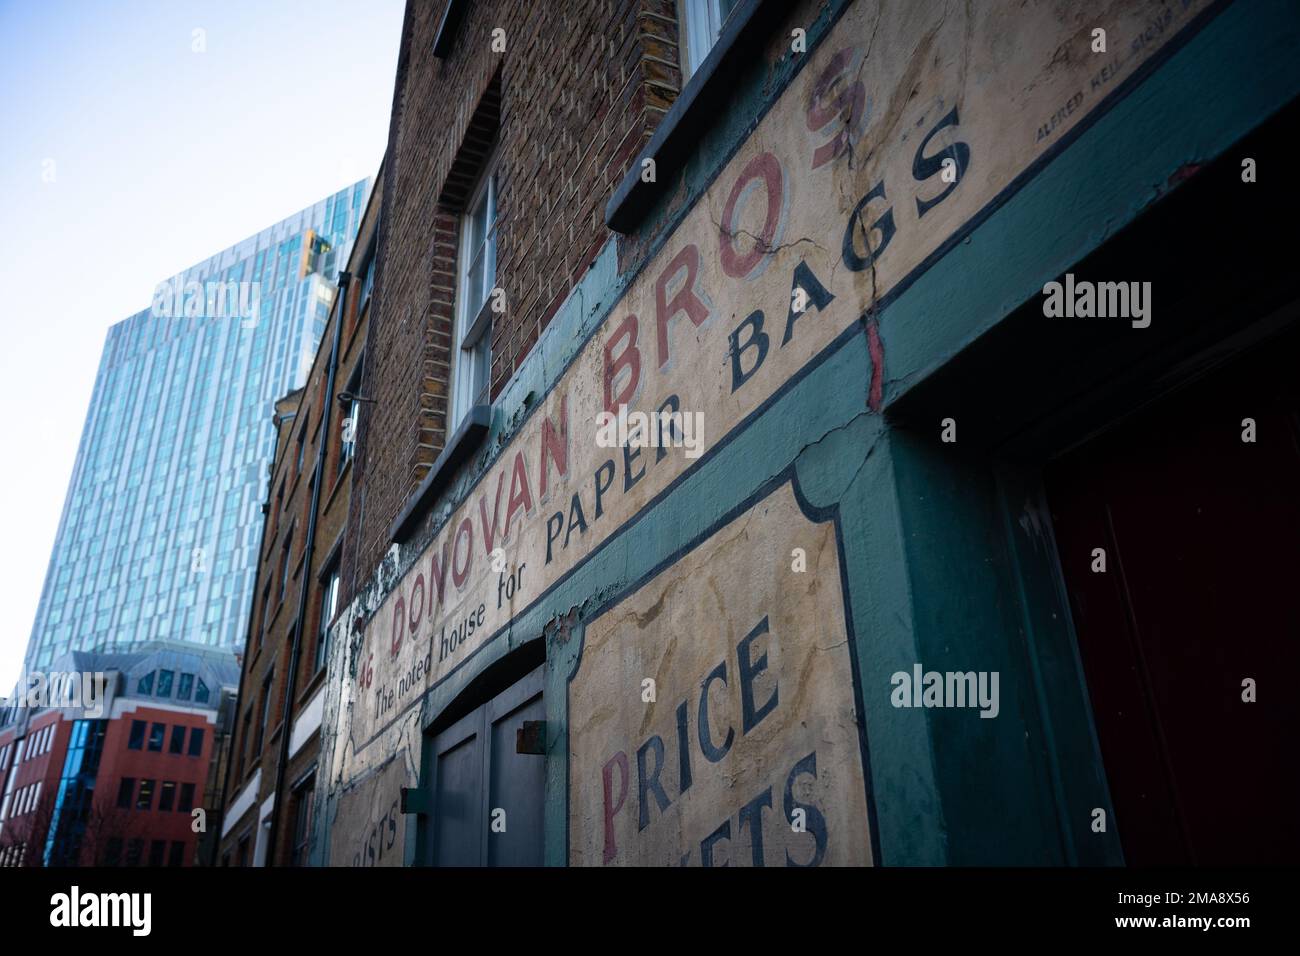 Old sign on building in the East End ofLondon Stock Photo